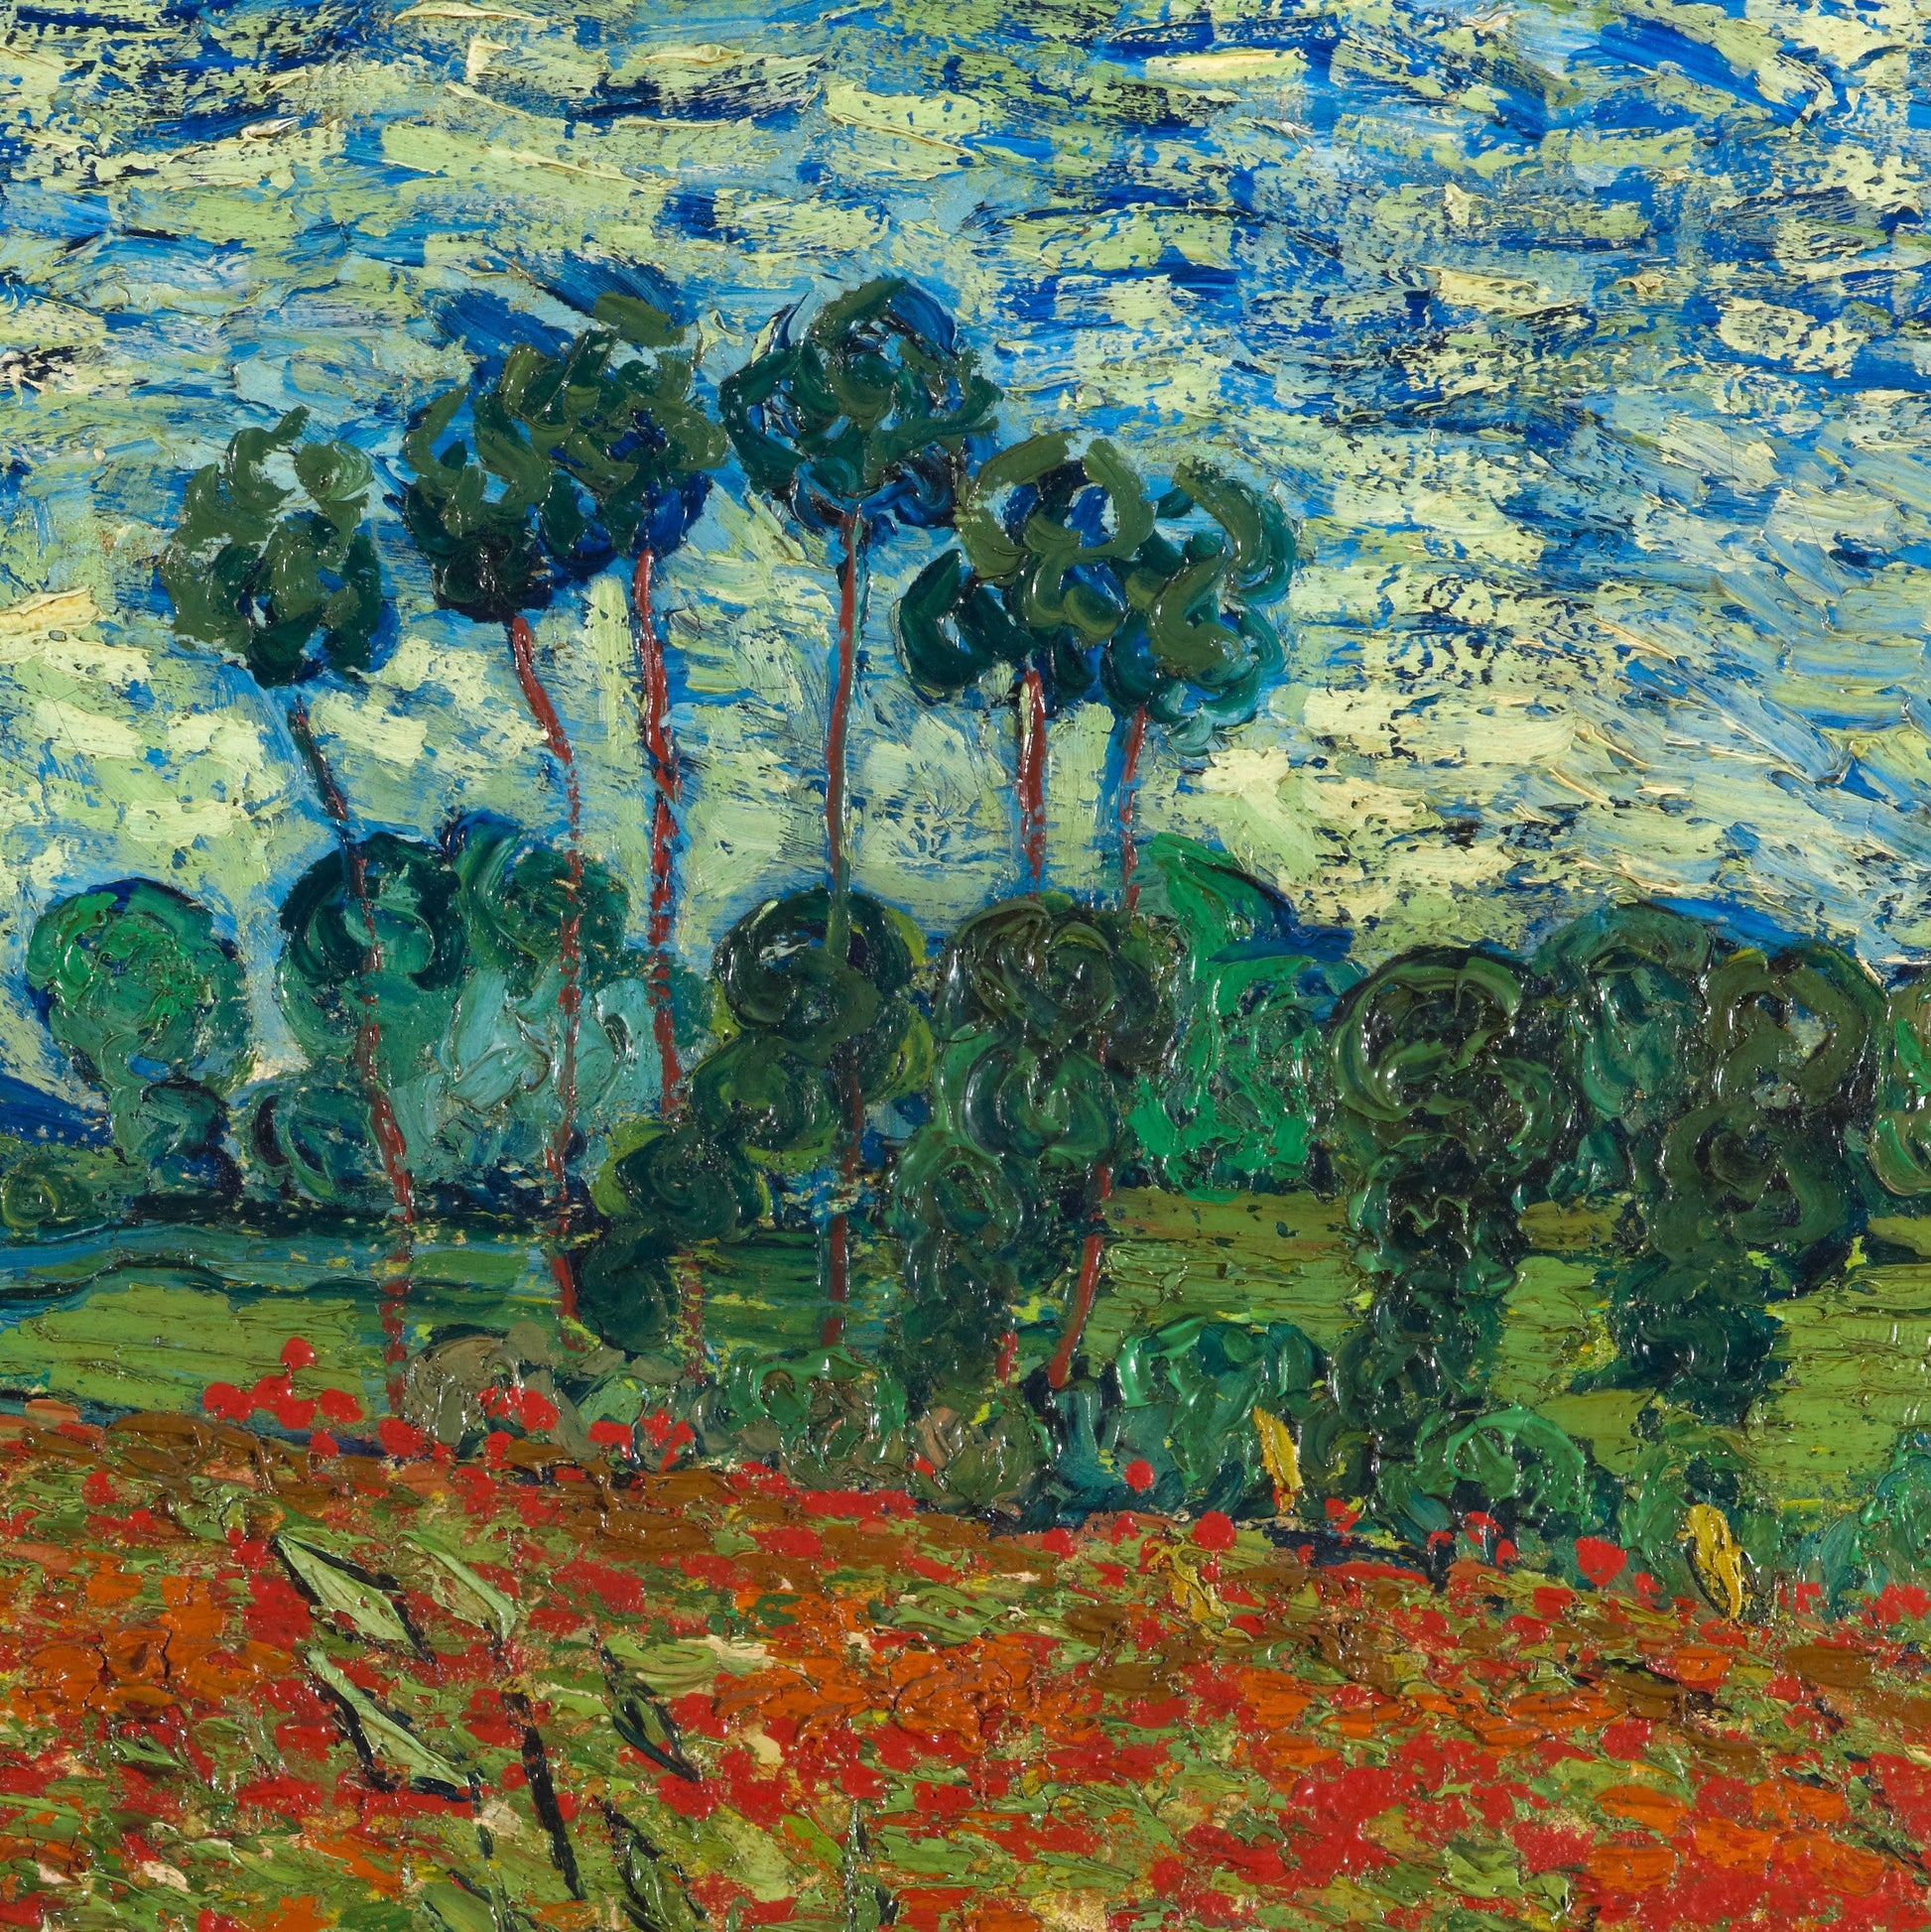 Poppy Field by Vincent Van Gogh, 3d Printed with texture and brush strokes looks like original oil-painting, code:222